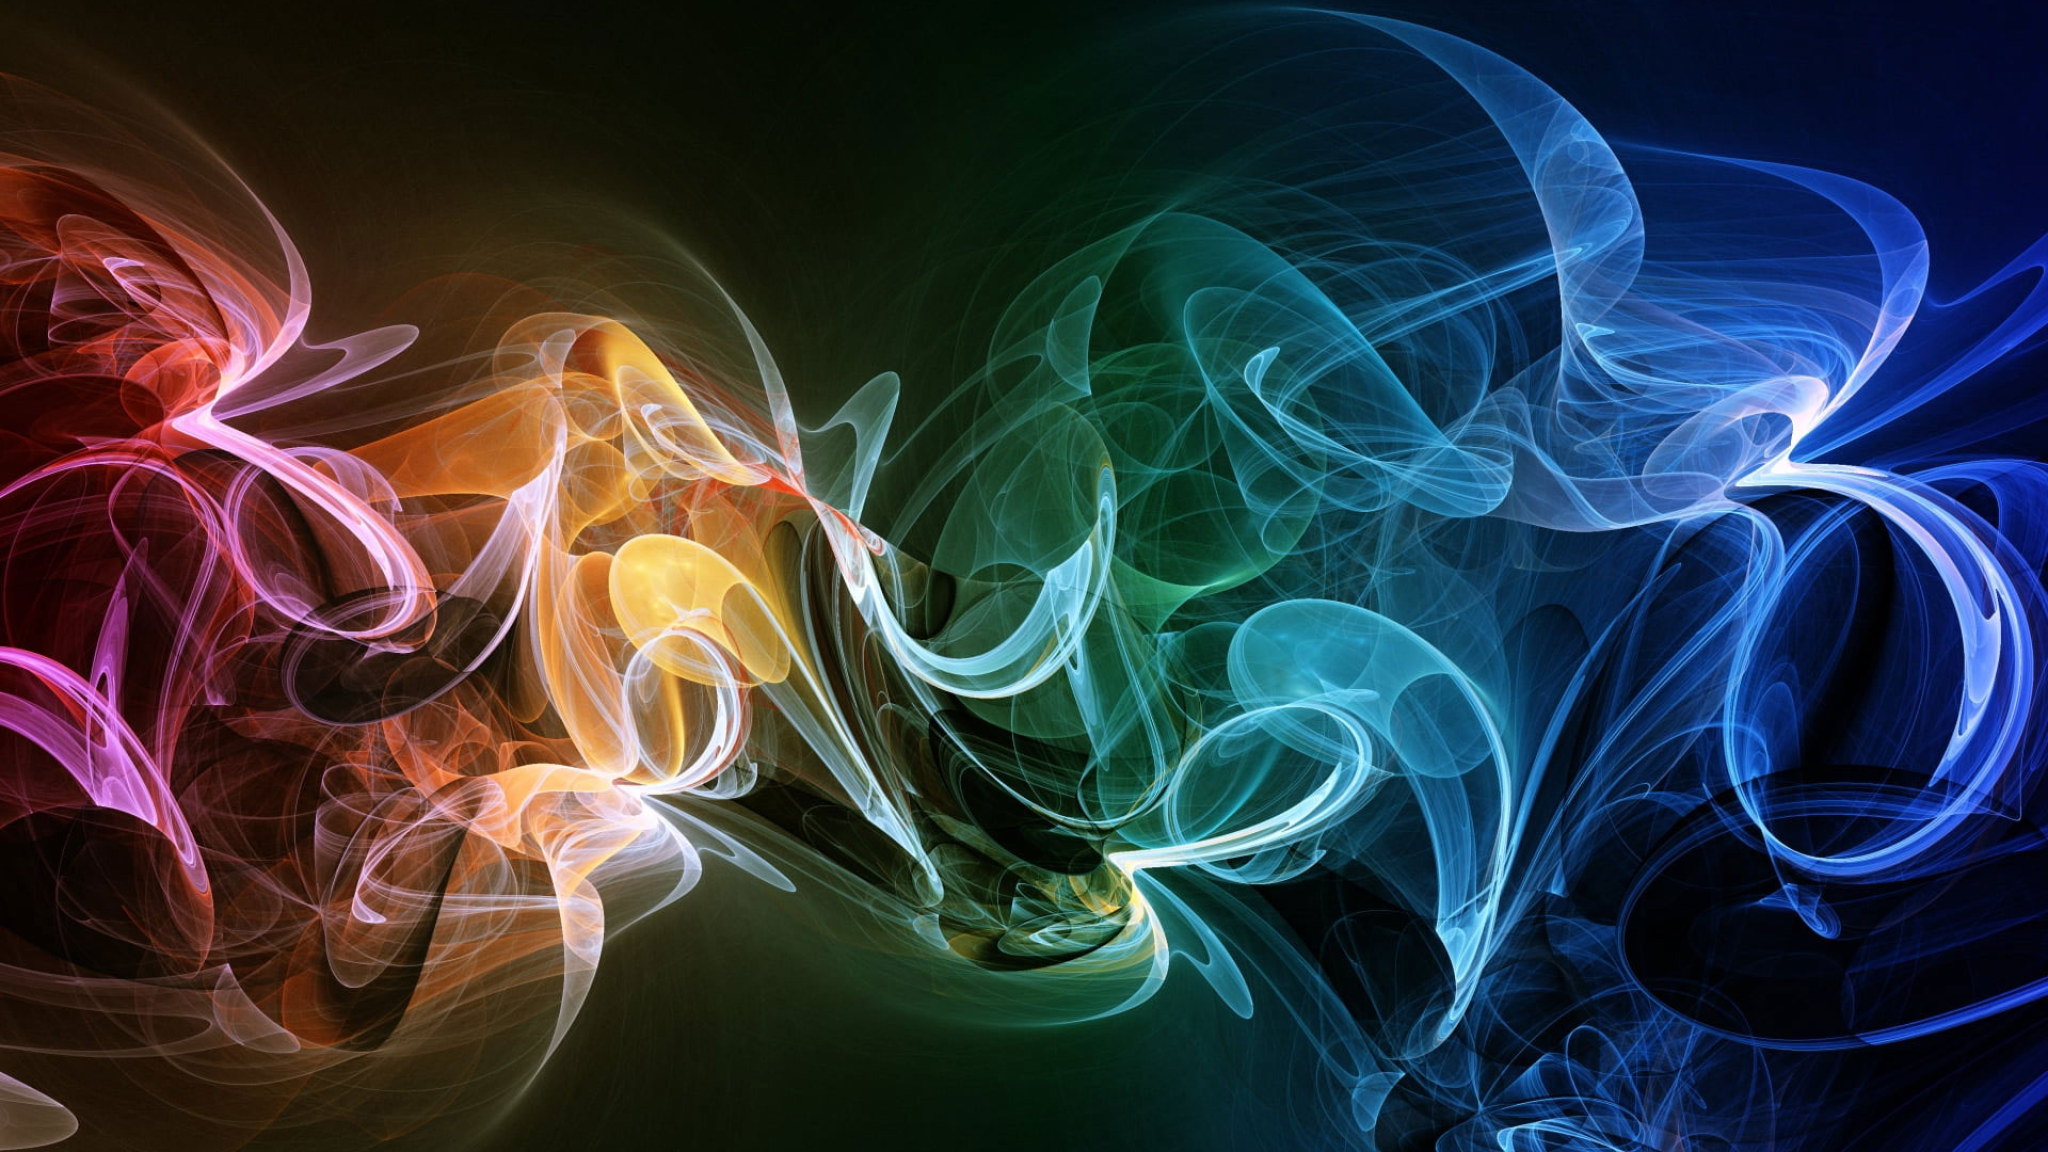 Wallpaper Windows 7 Colorful, Assorted Color Smoke • Wallpaper For You